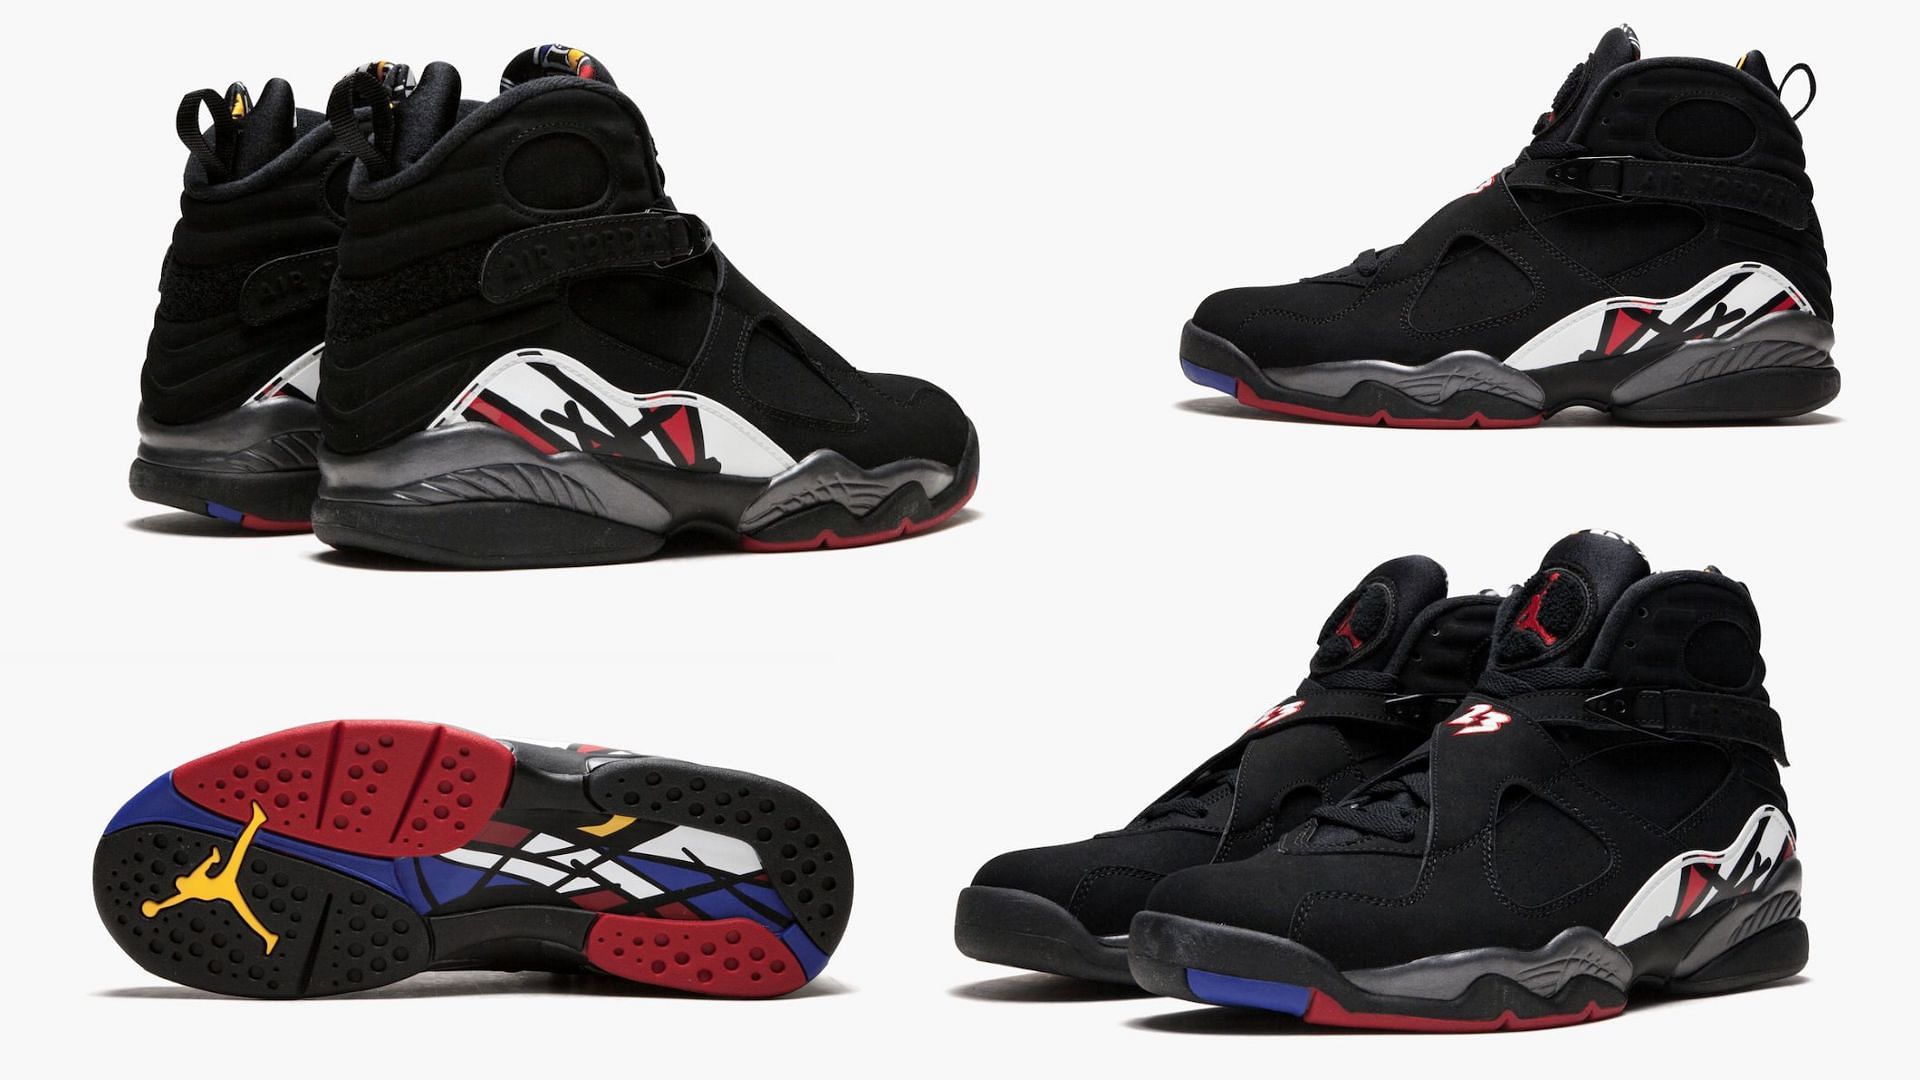 Where to buy Air Jordan 8 “Playoffs” shoes? Price, release date, and